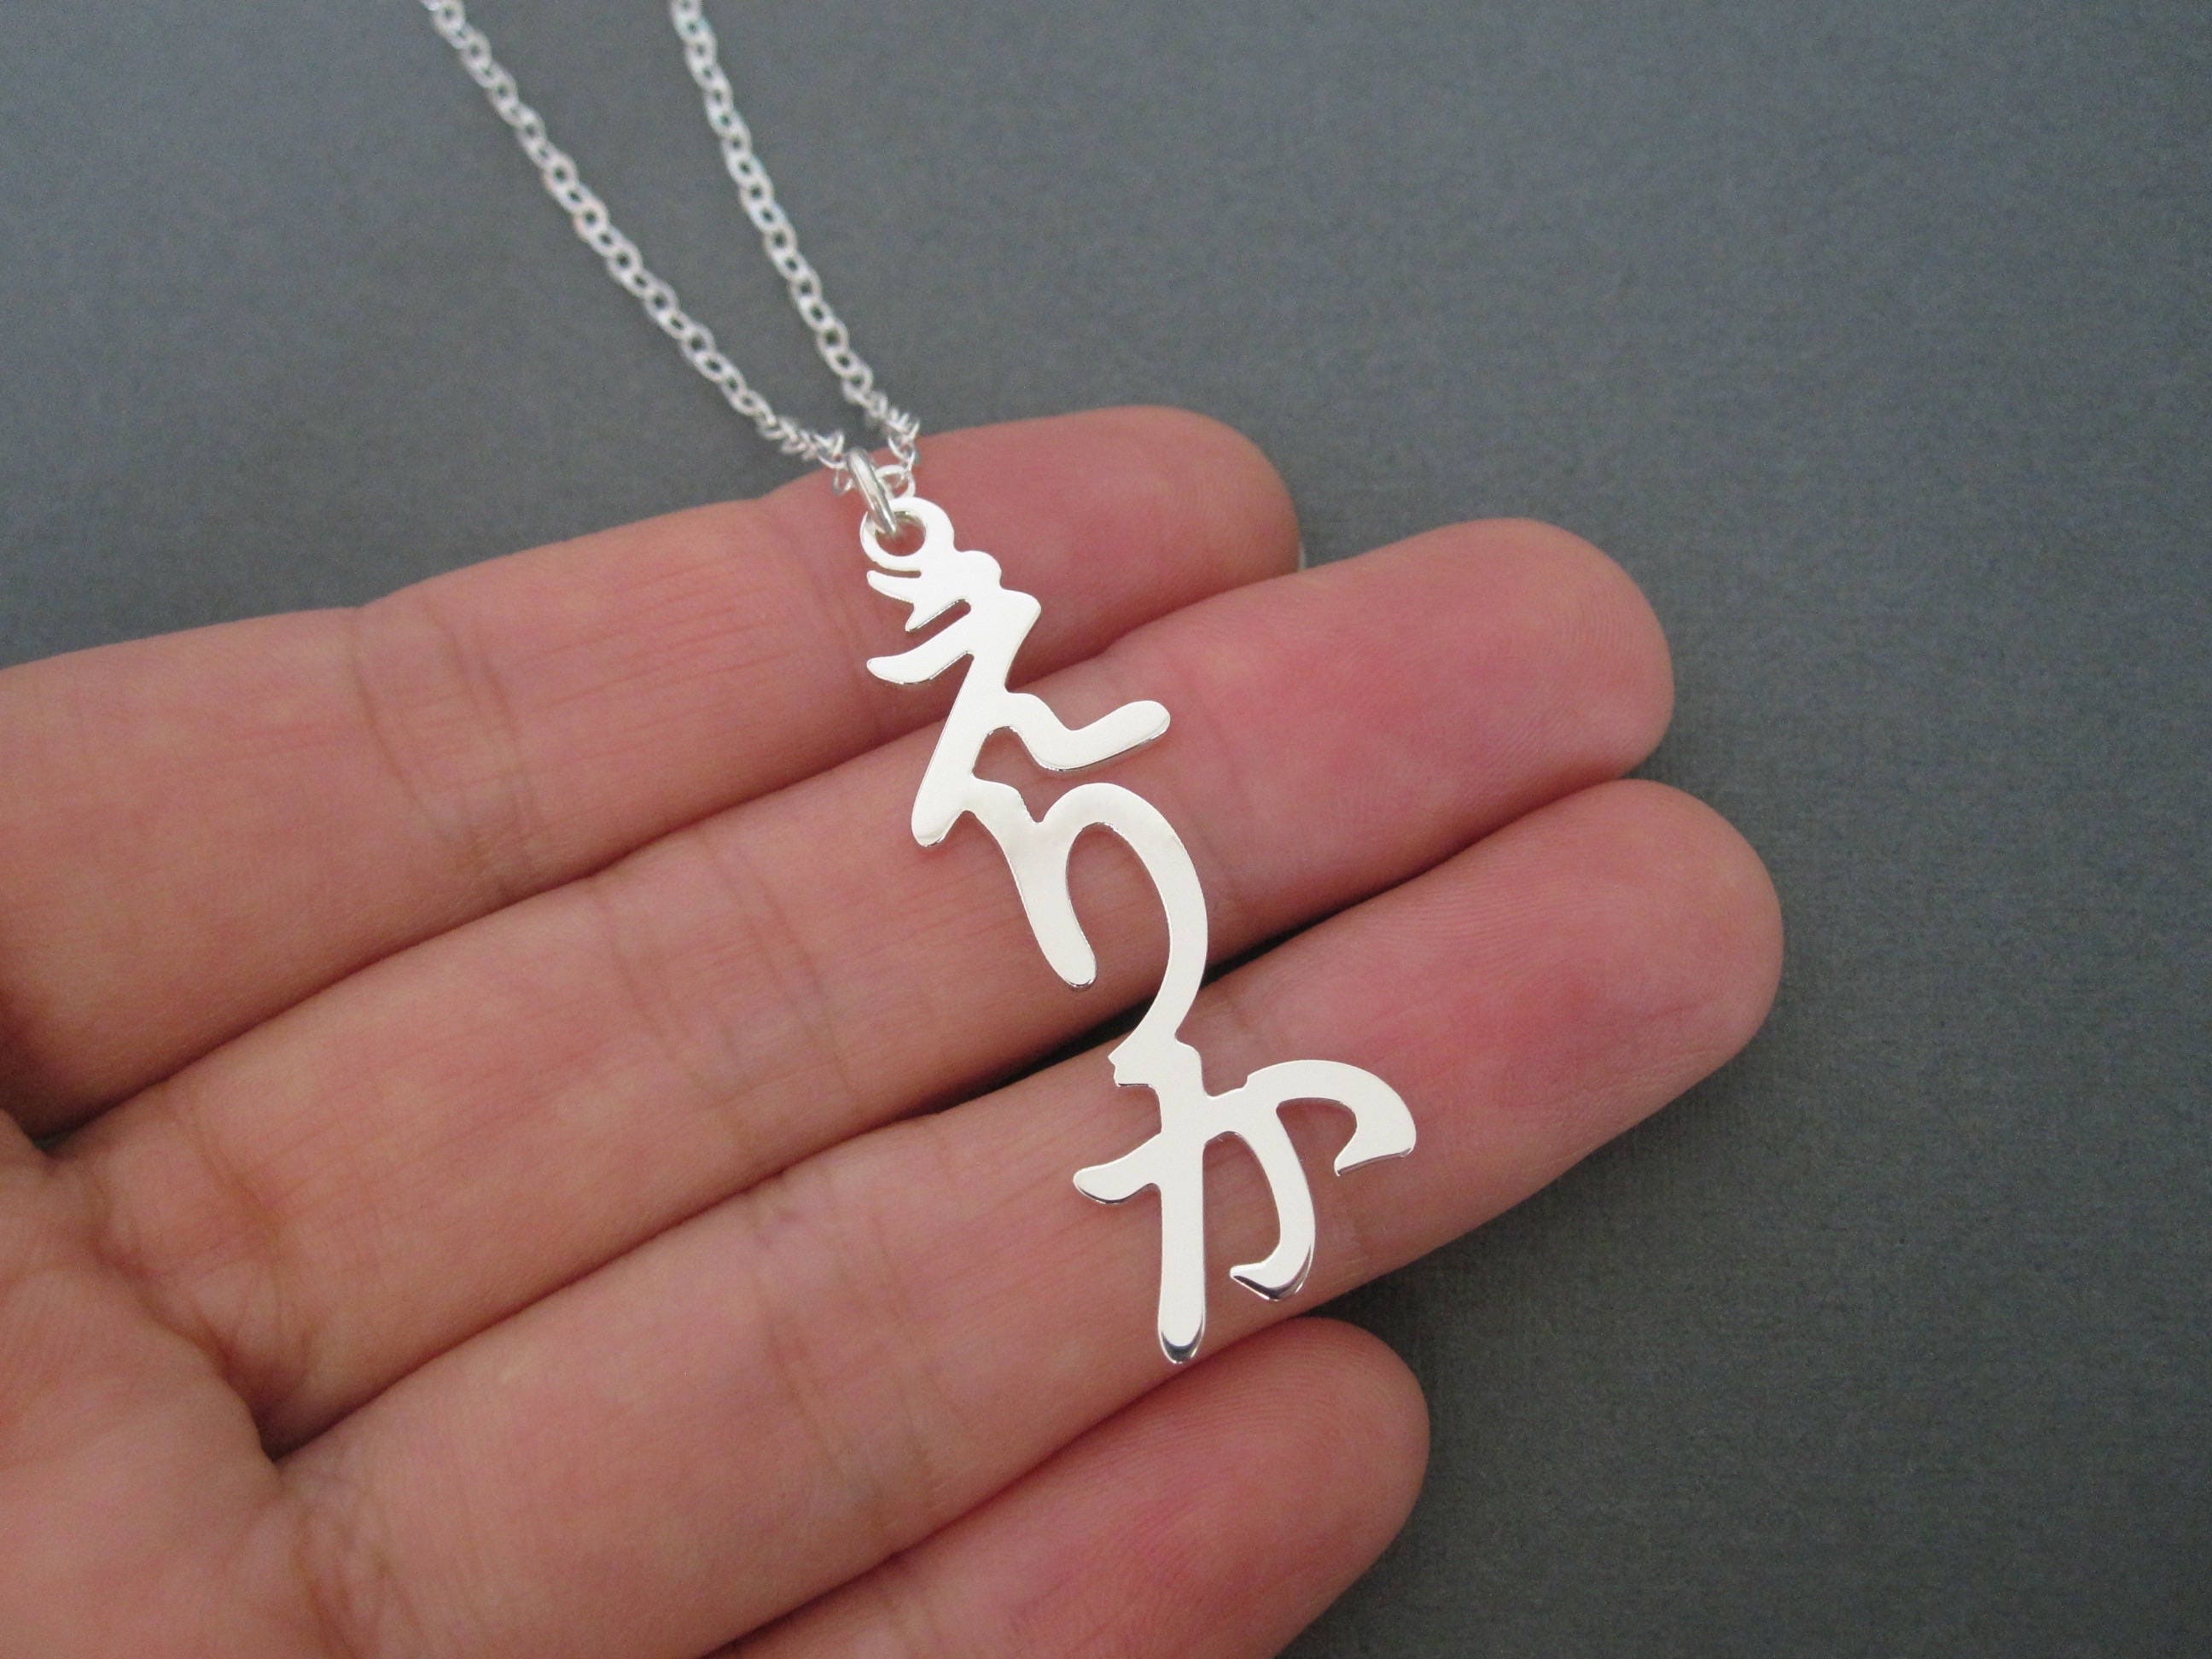 Japanese 5 Yen Coin Sterling Silver Necklace – OneTree Coin Jewelry